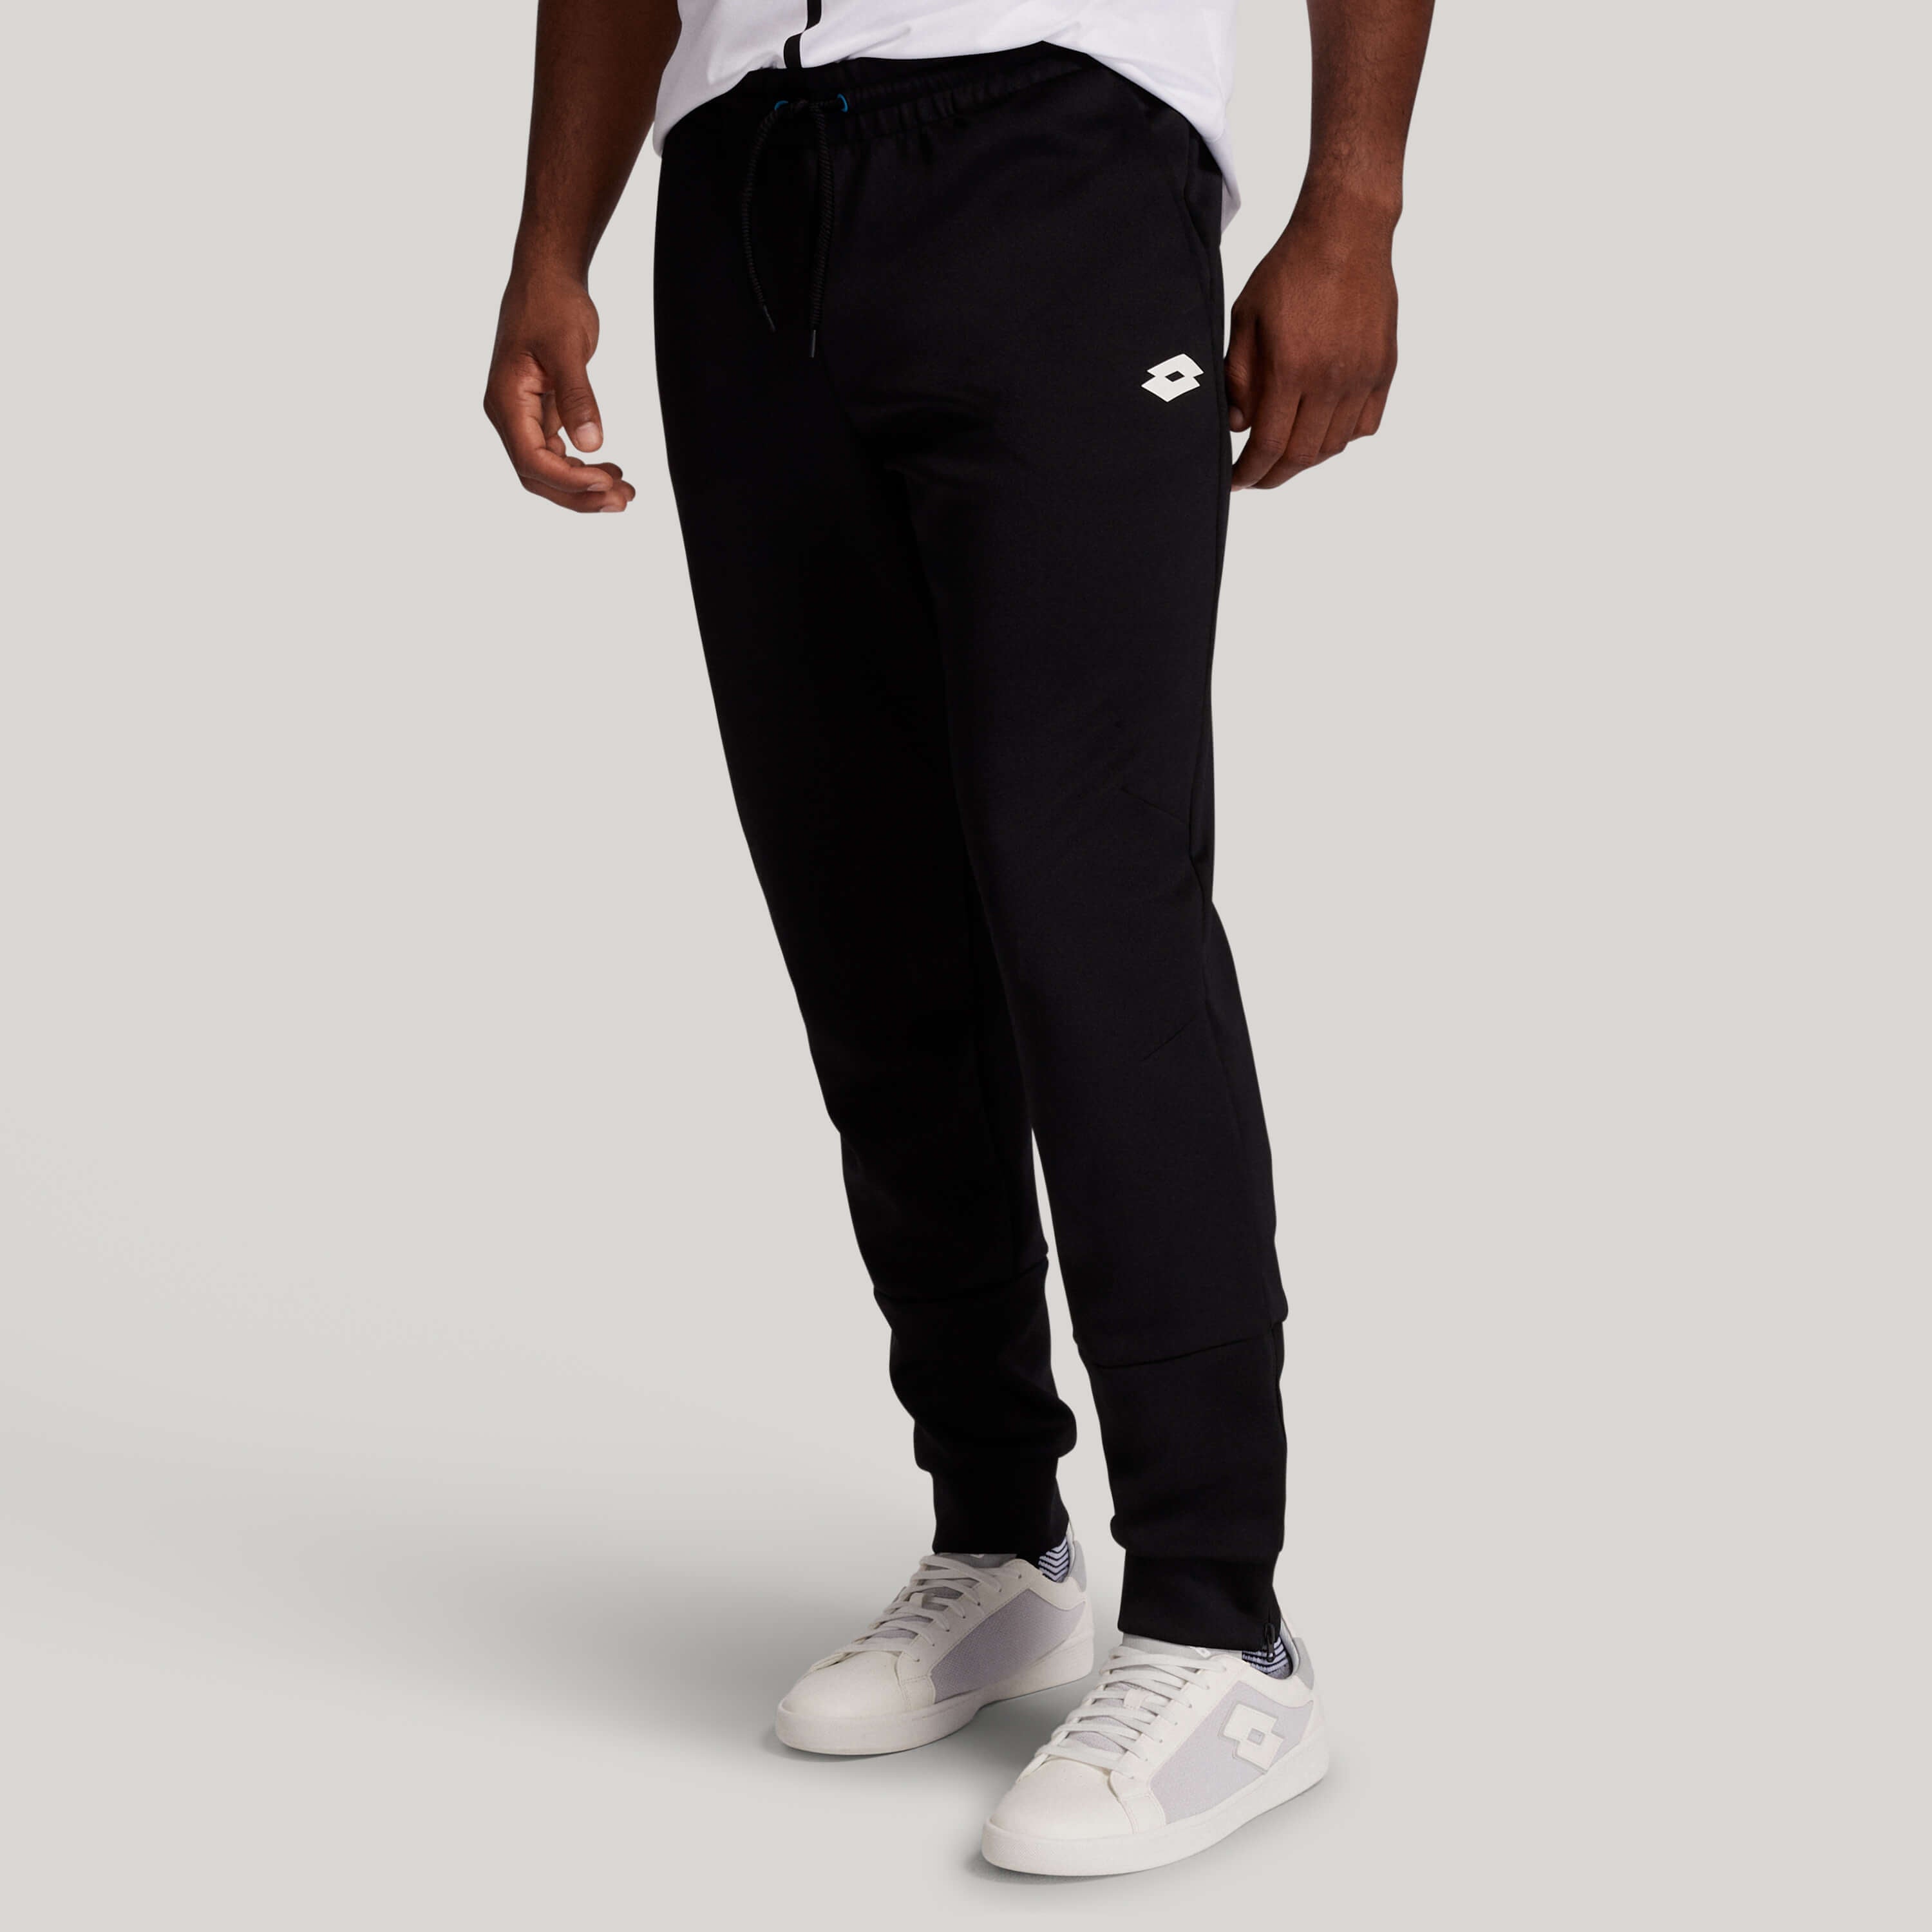 Buy MSC PANT CUFF II from the APPAREL for MAN catalog. 218926_1CL